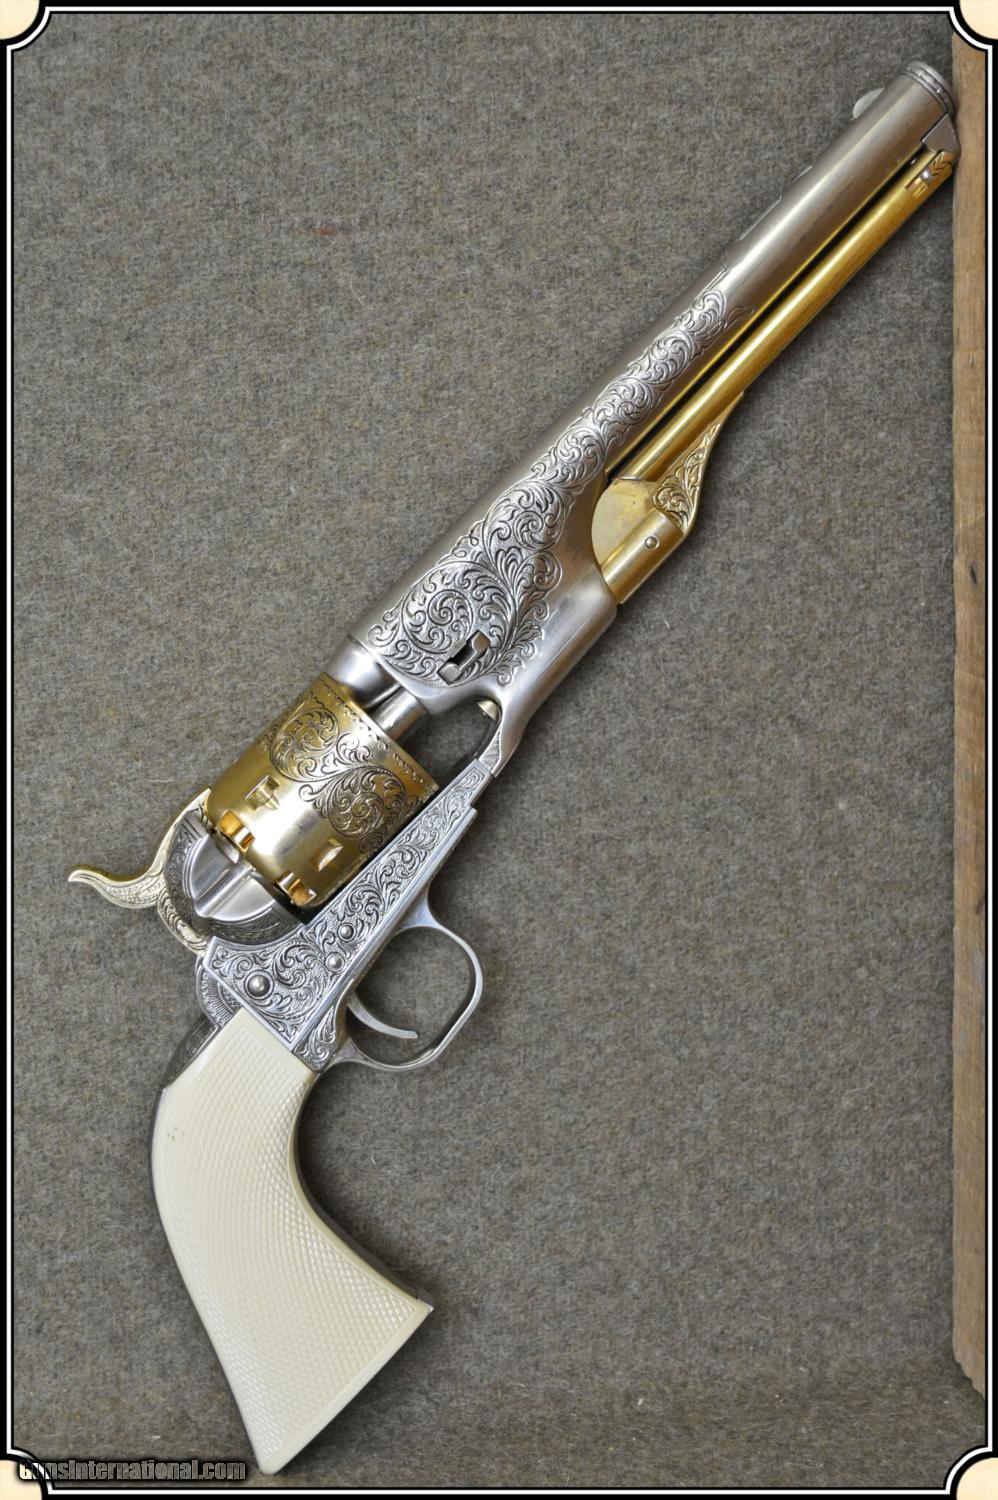 General Custer Revolver by the Franklin Mint.